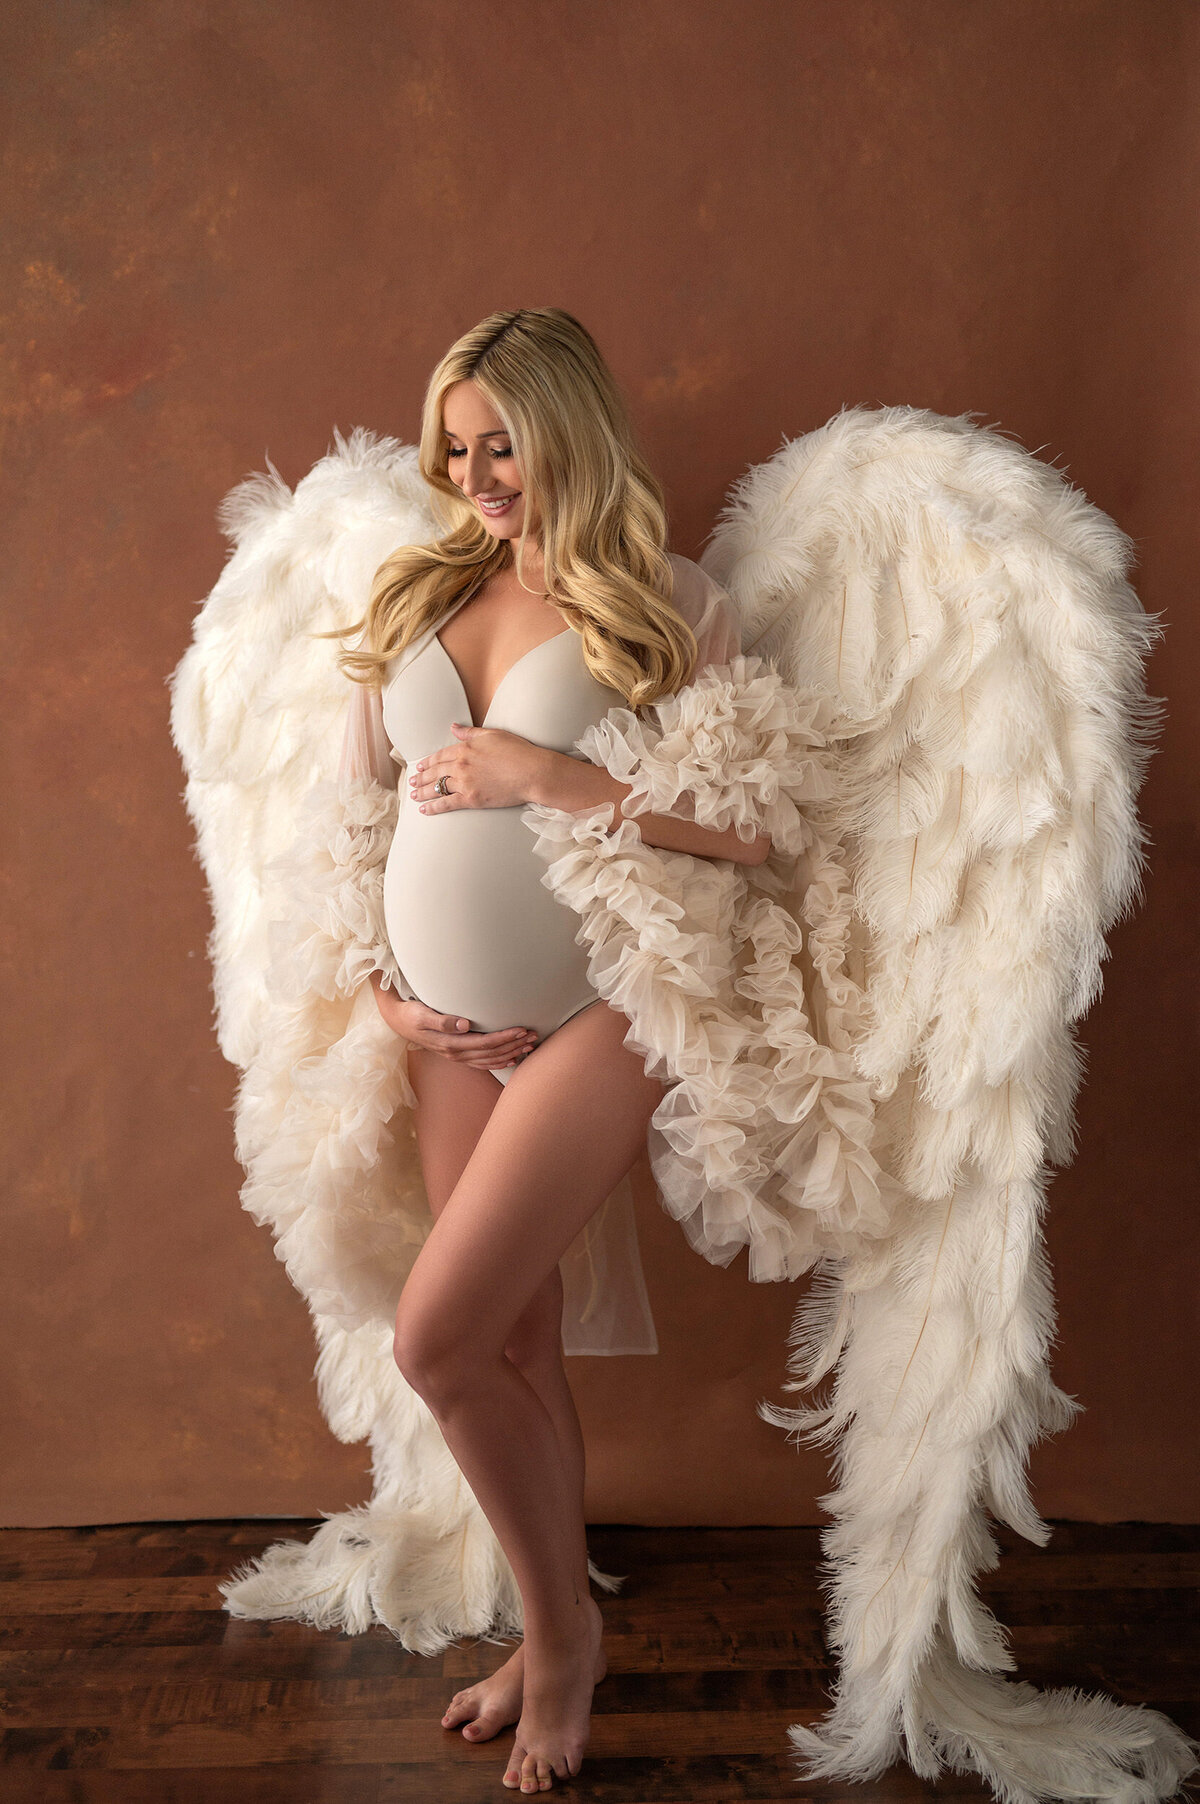 Full length image of a pregnant woman in an ivory bodysuit and floor length angel wings cradling her belly in our Waukesha Wisconsin studio .